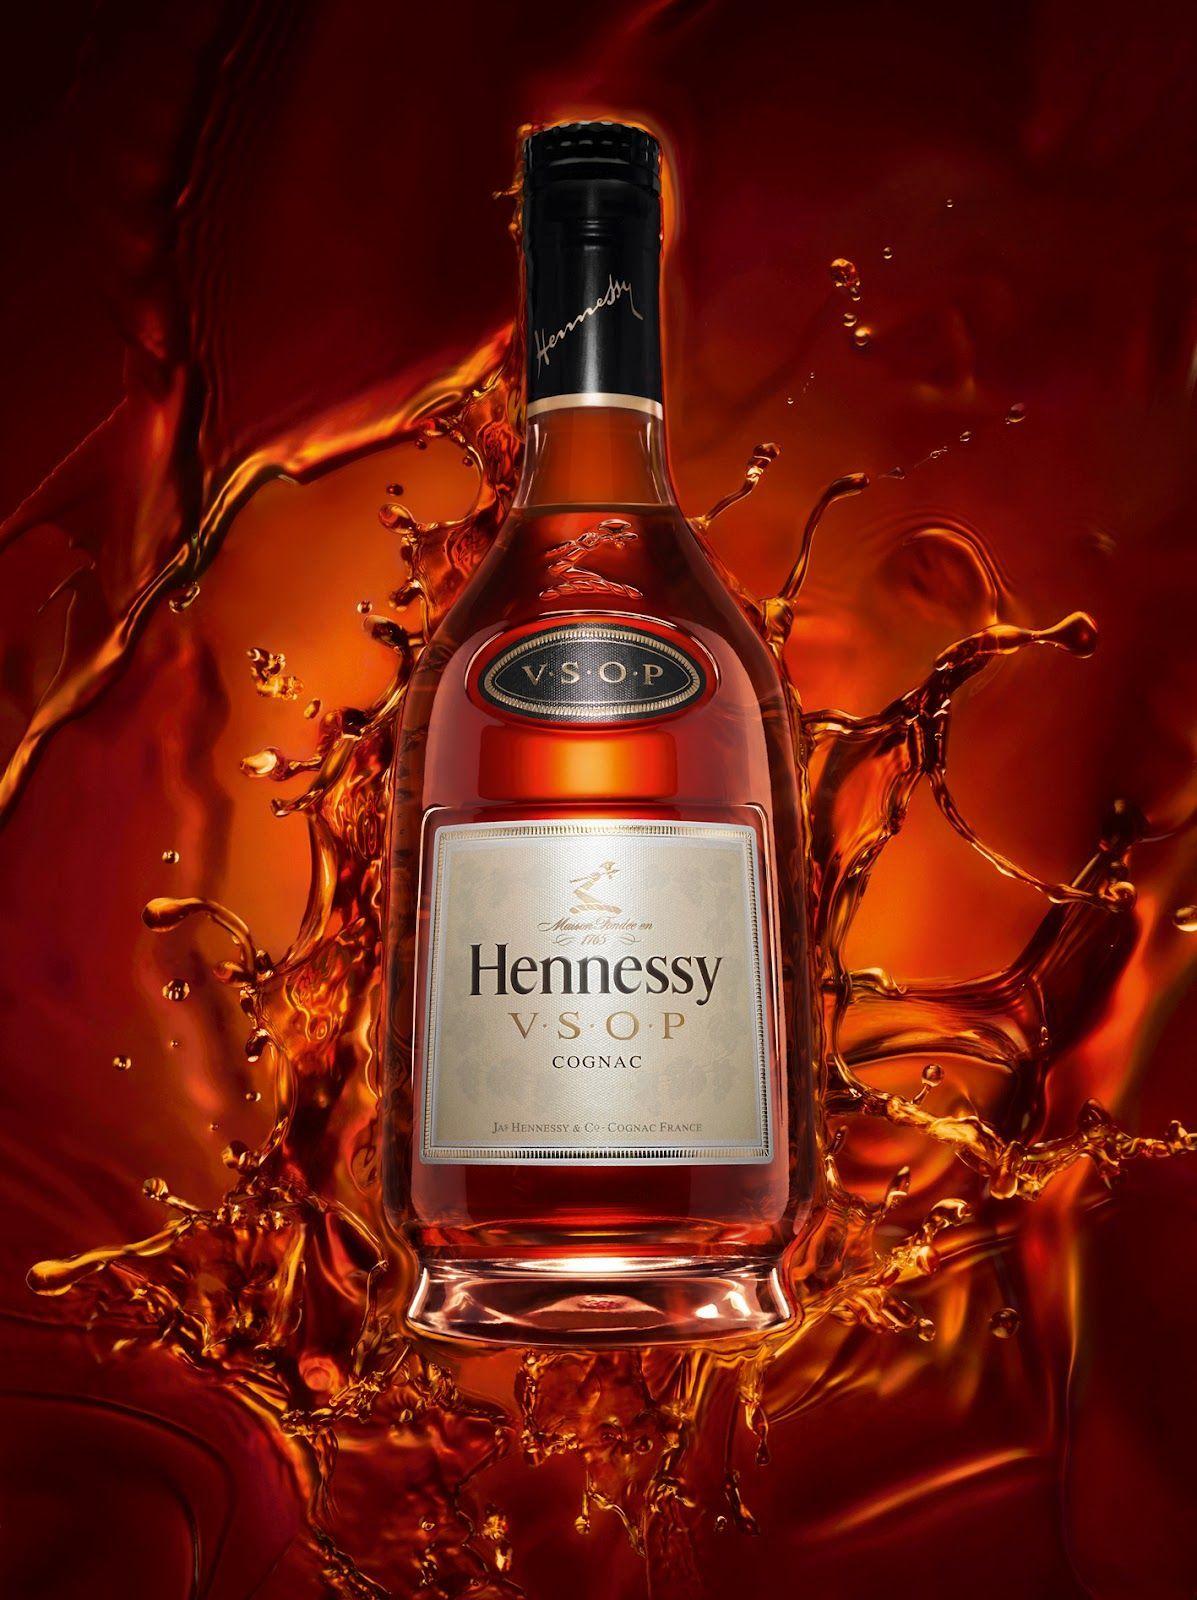 Hennessy Wallpapers Top Free Hennessy Backgrounds Wallpaperaccess